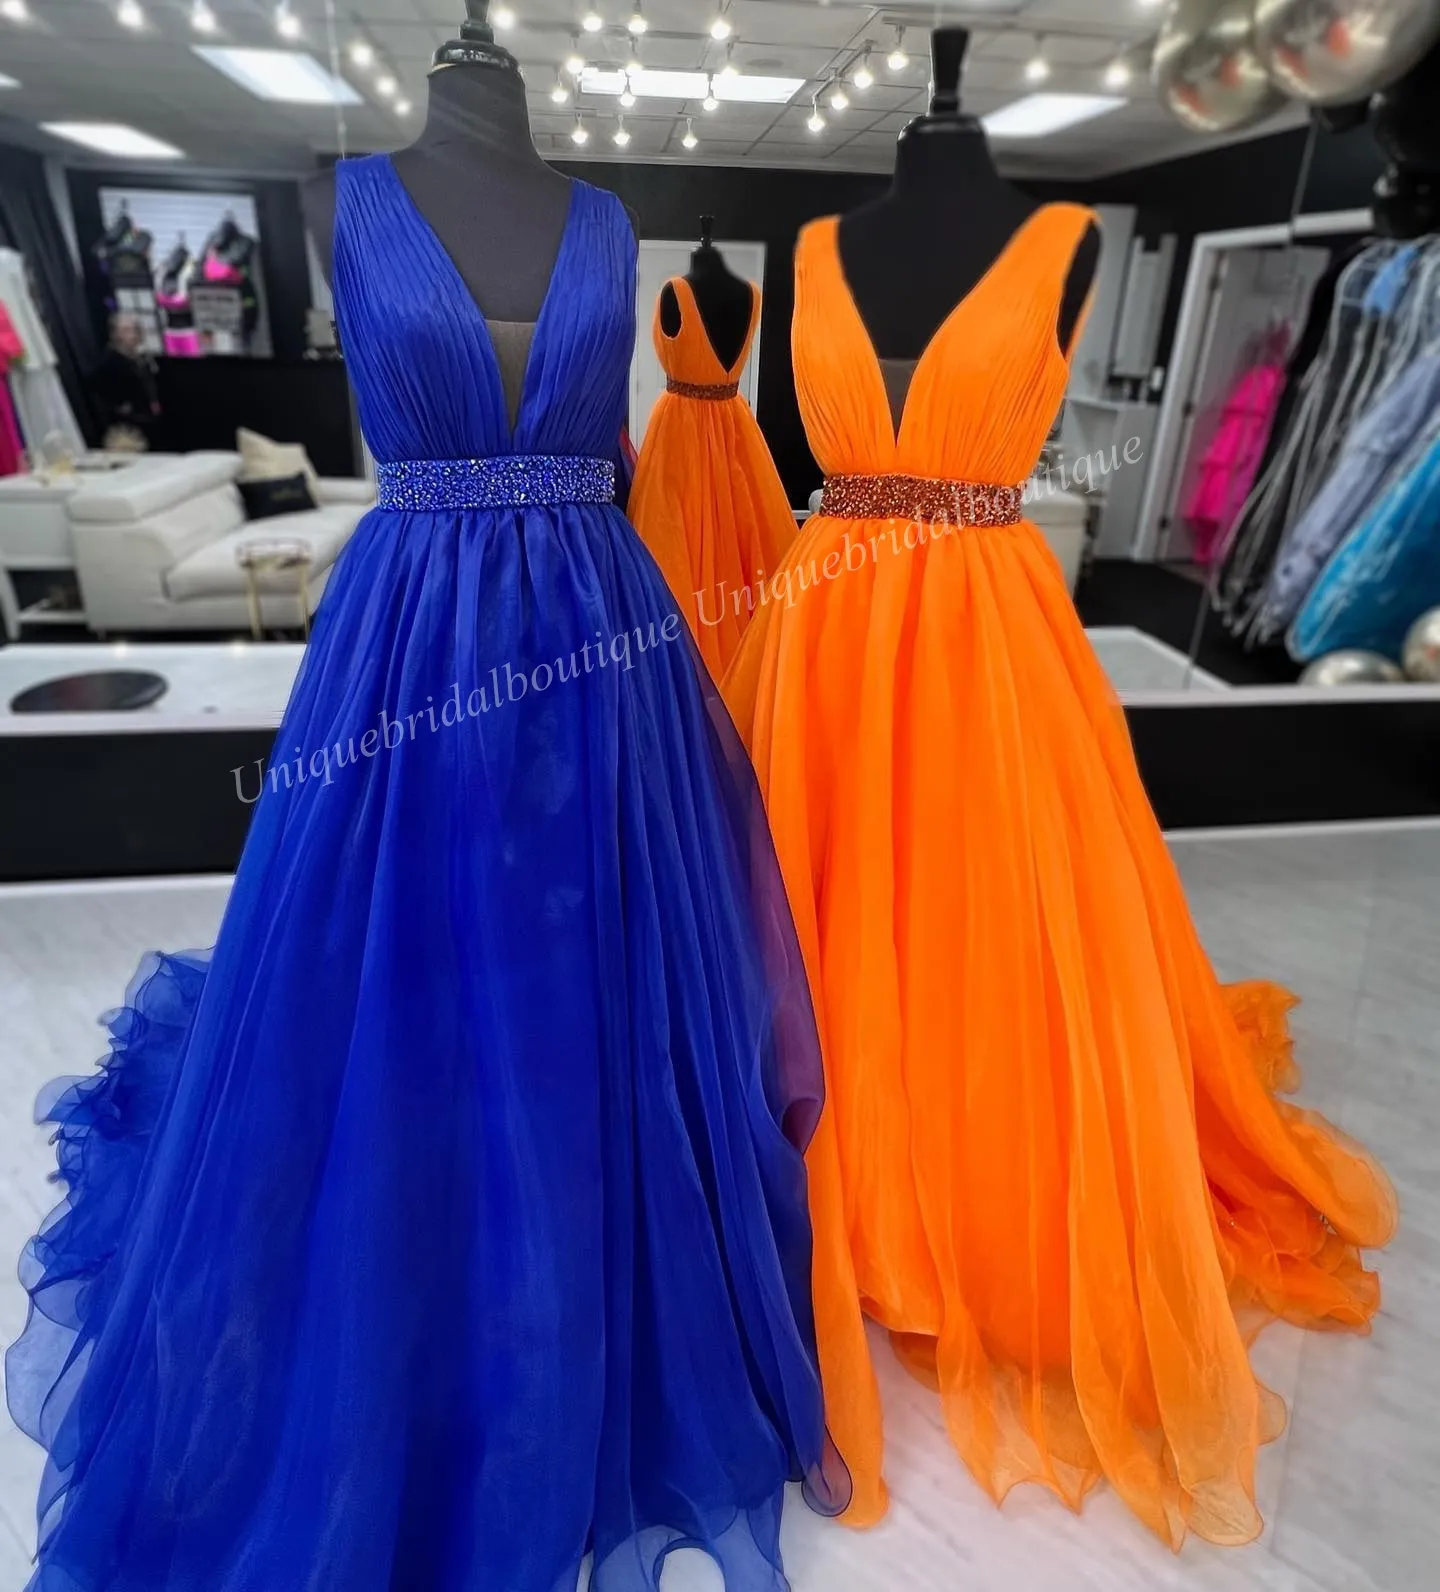 Plunge Neckline Dress with Tulle Bottom - Royal Blue - Be Fabulous